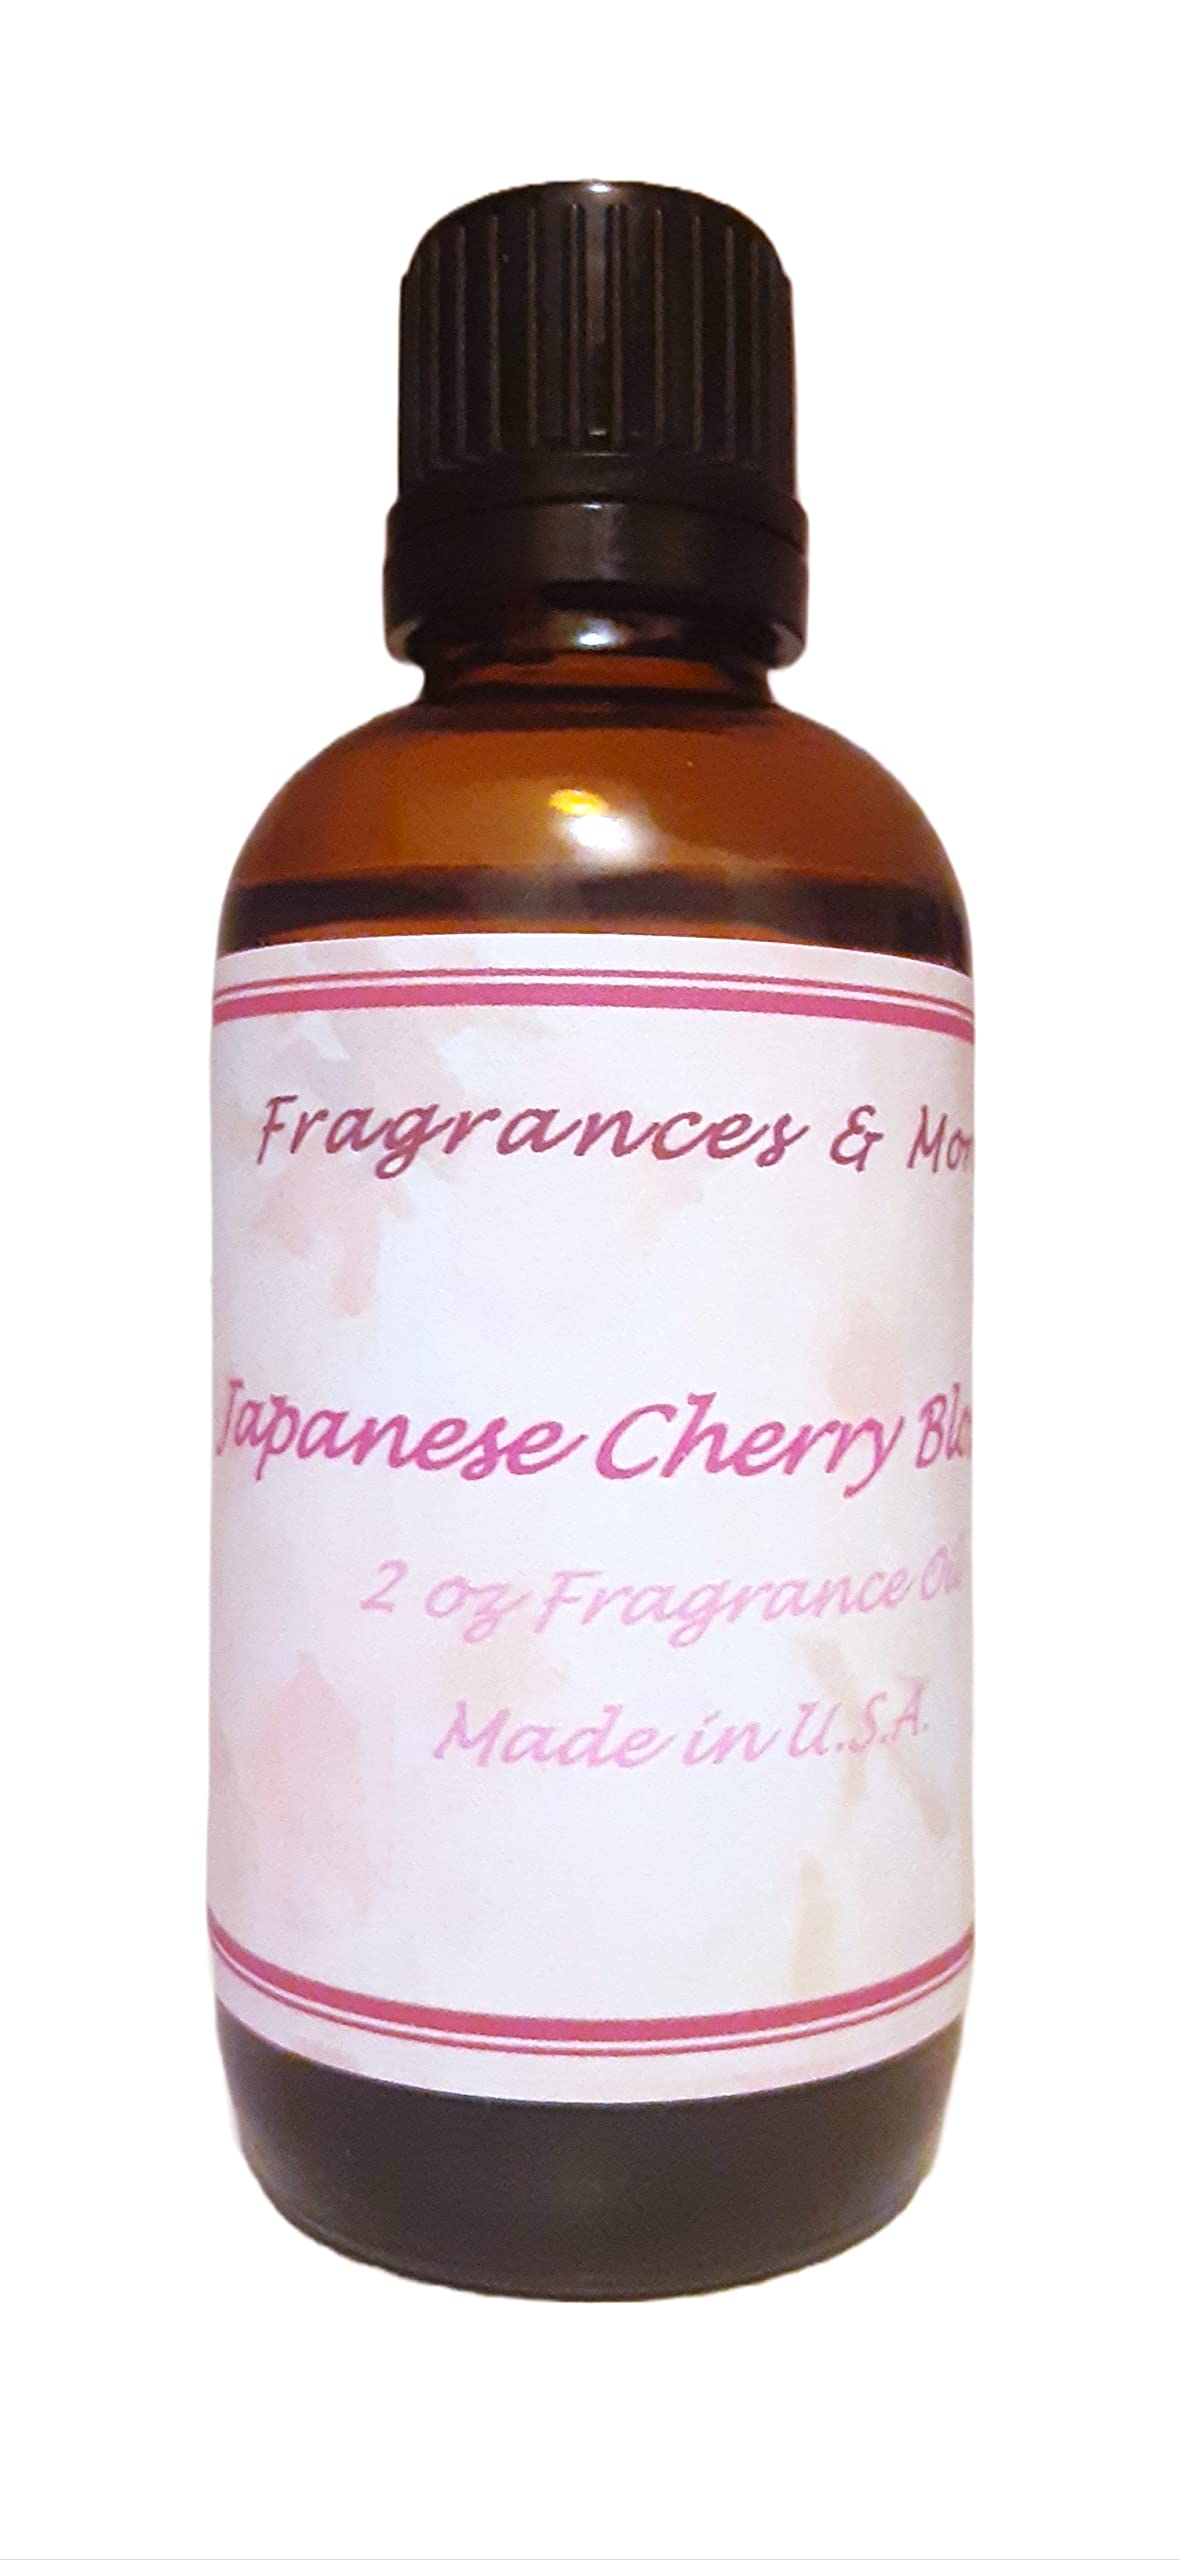 Fragrances & More Japanese Cherry Blossom Scented Oil-Premium Fragrance Oil for Soap Candle Making, Bath Body Products, Home Office Scents & Diffuser Aromatherapy - 2oz (60ml) Amber Glass Bottle